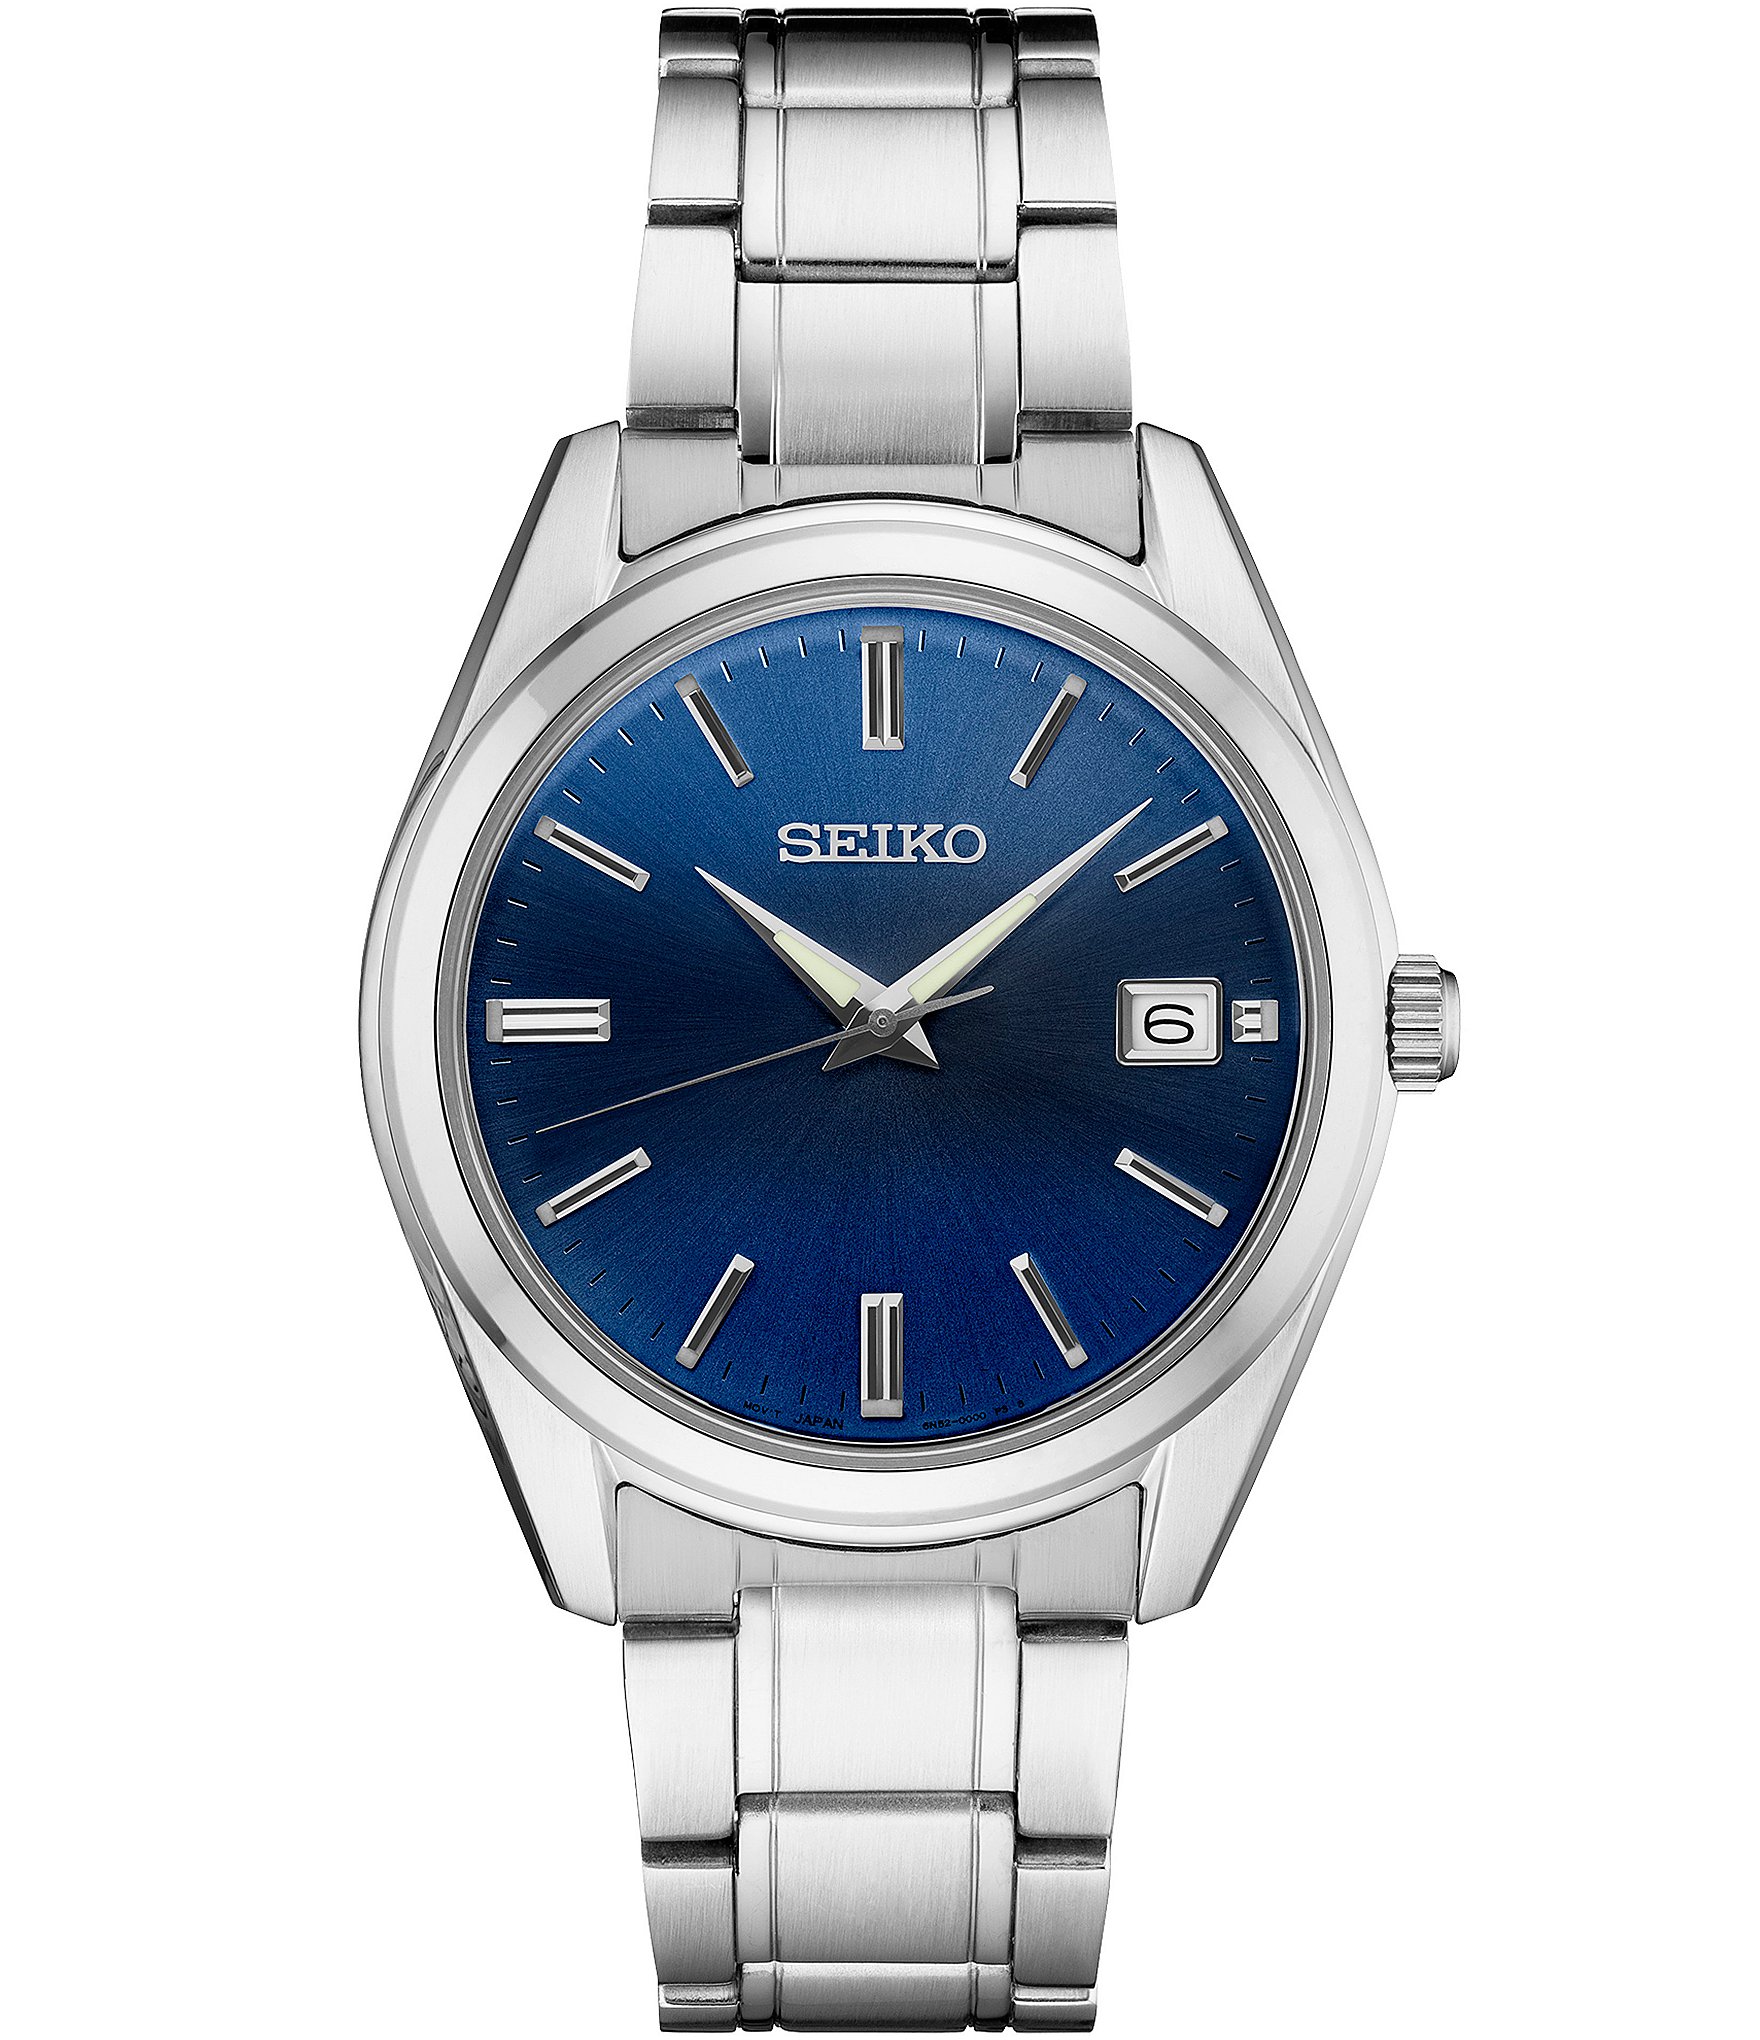 Seiko Watches For Men And Women Online-cokhiquangminh.vn